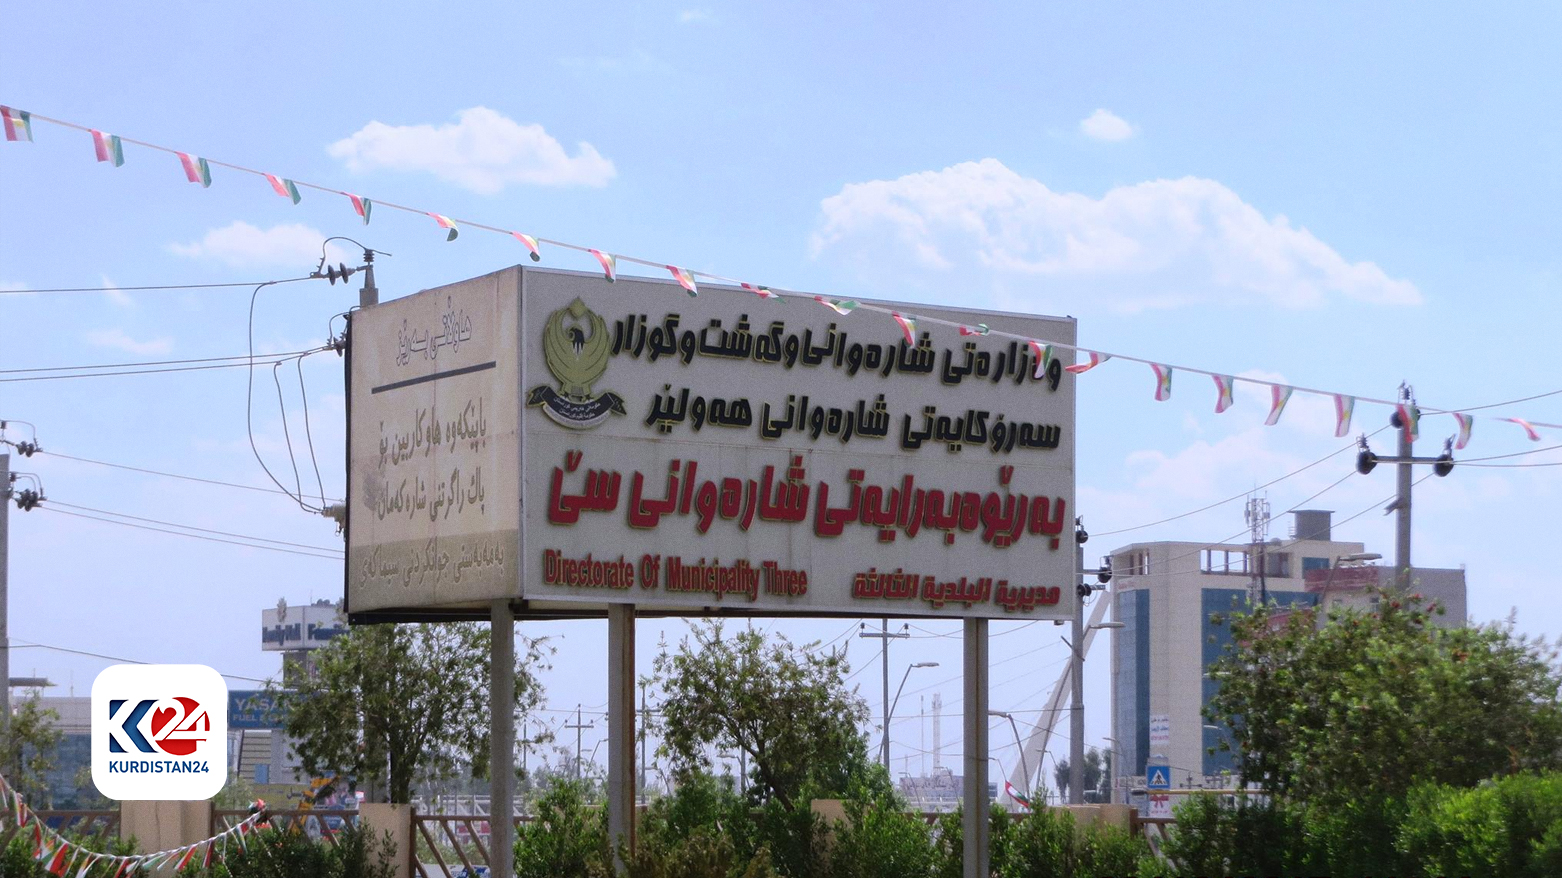 The sign reads: Ministry of Tourism, The Headquarter of Erbil Council, Erbil Municipality Directorate 3 (Photo: Kurdistan 24)